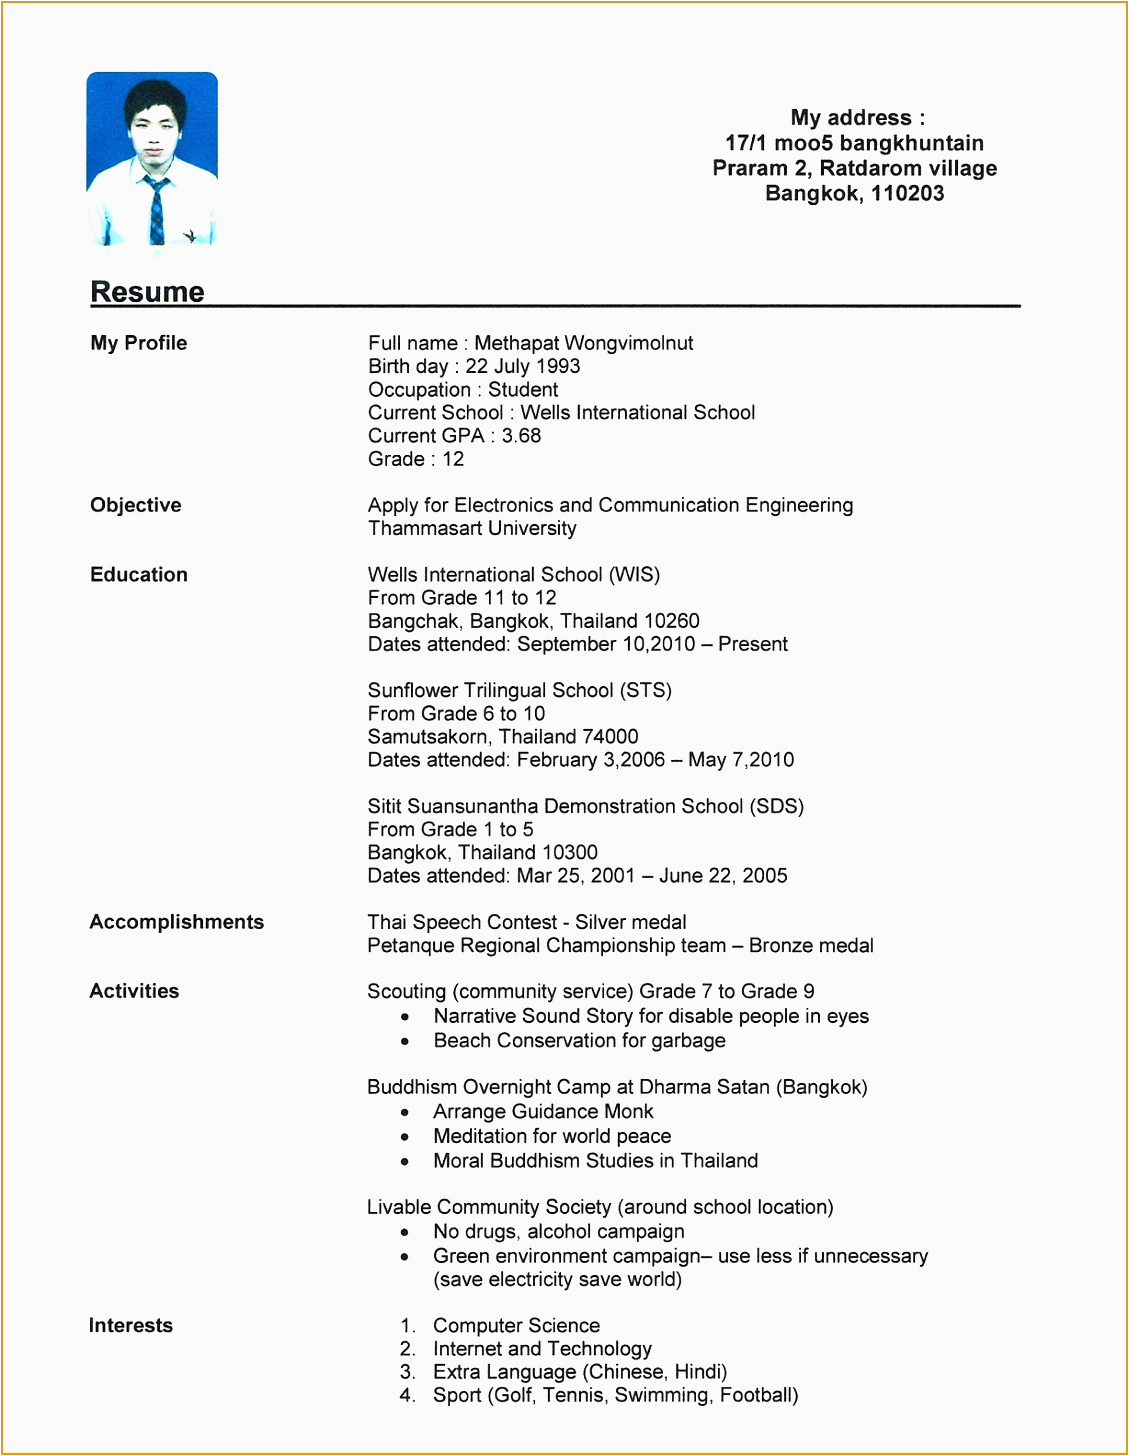 Sample Resume for College Graduates with No Experience 6 Resume Templates College Student No Job Experience Free Samples